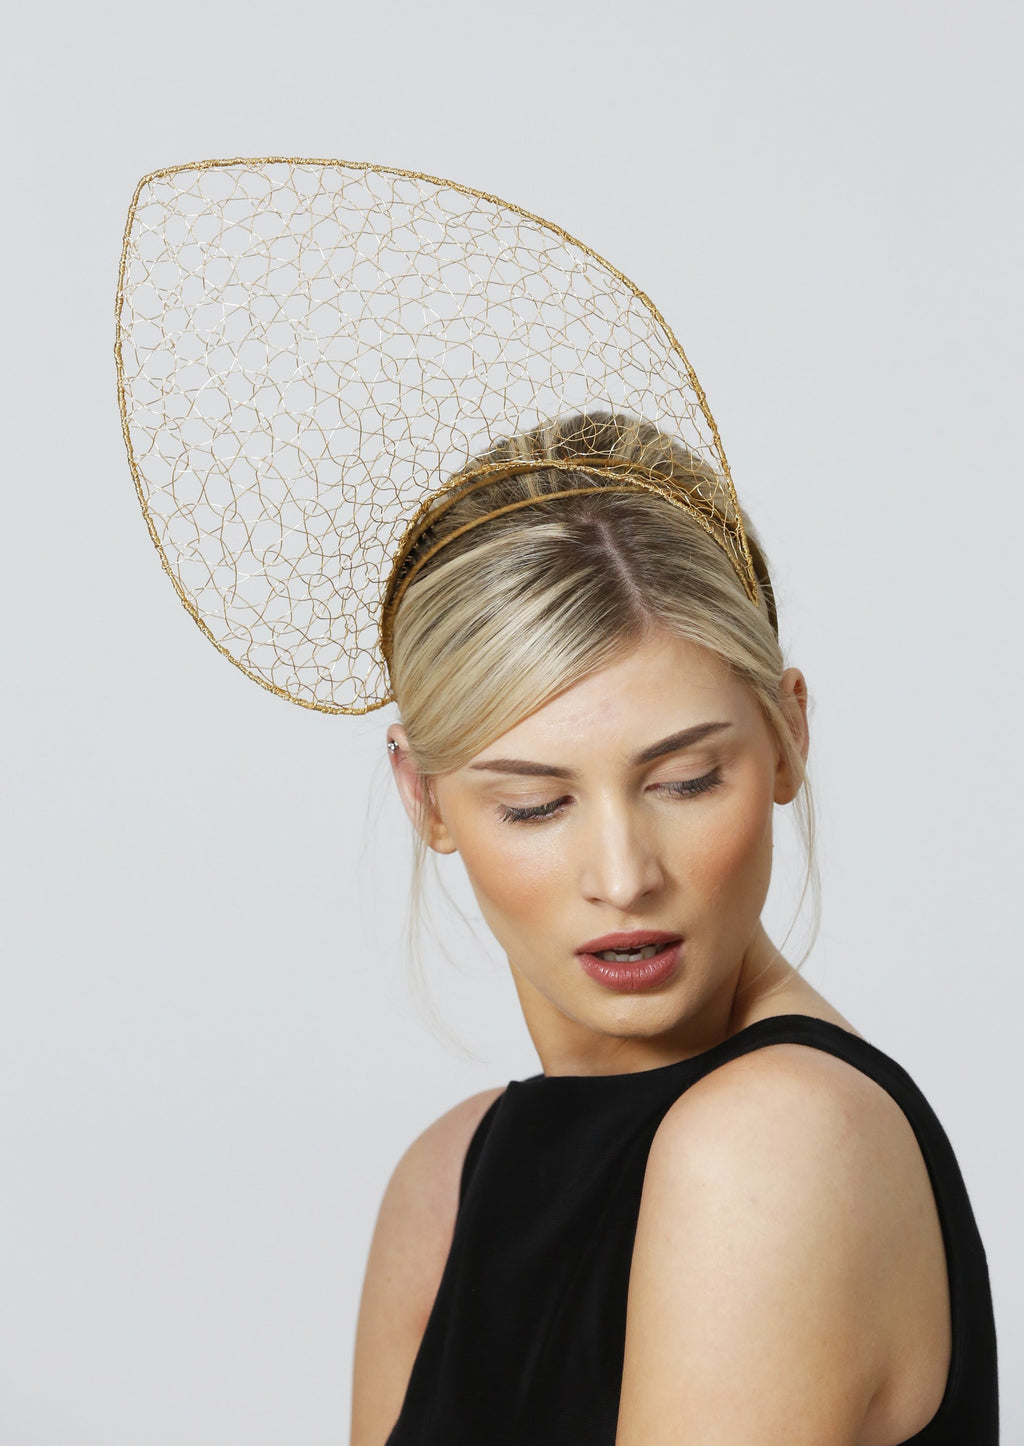 A model wearing a gold headpiece looks down over her shoulder. The headpiece is shaped like a petal and sits above her head, with a height about the same again as her head. It tilts to her right hand side. It is constructed of an outer frame in gold giving the petal outline, filled in with a finer mesh-llike gold wire lace that is see-through.